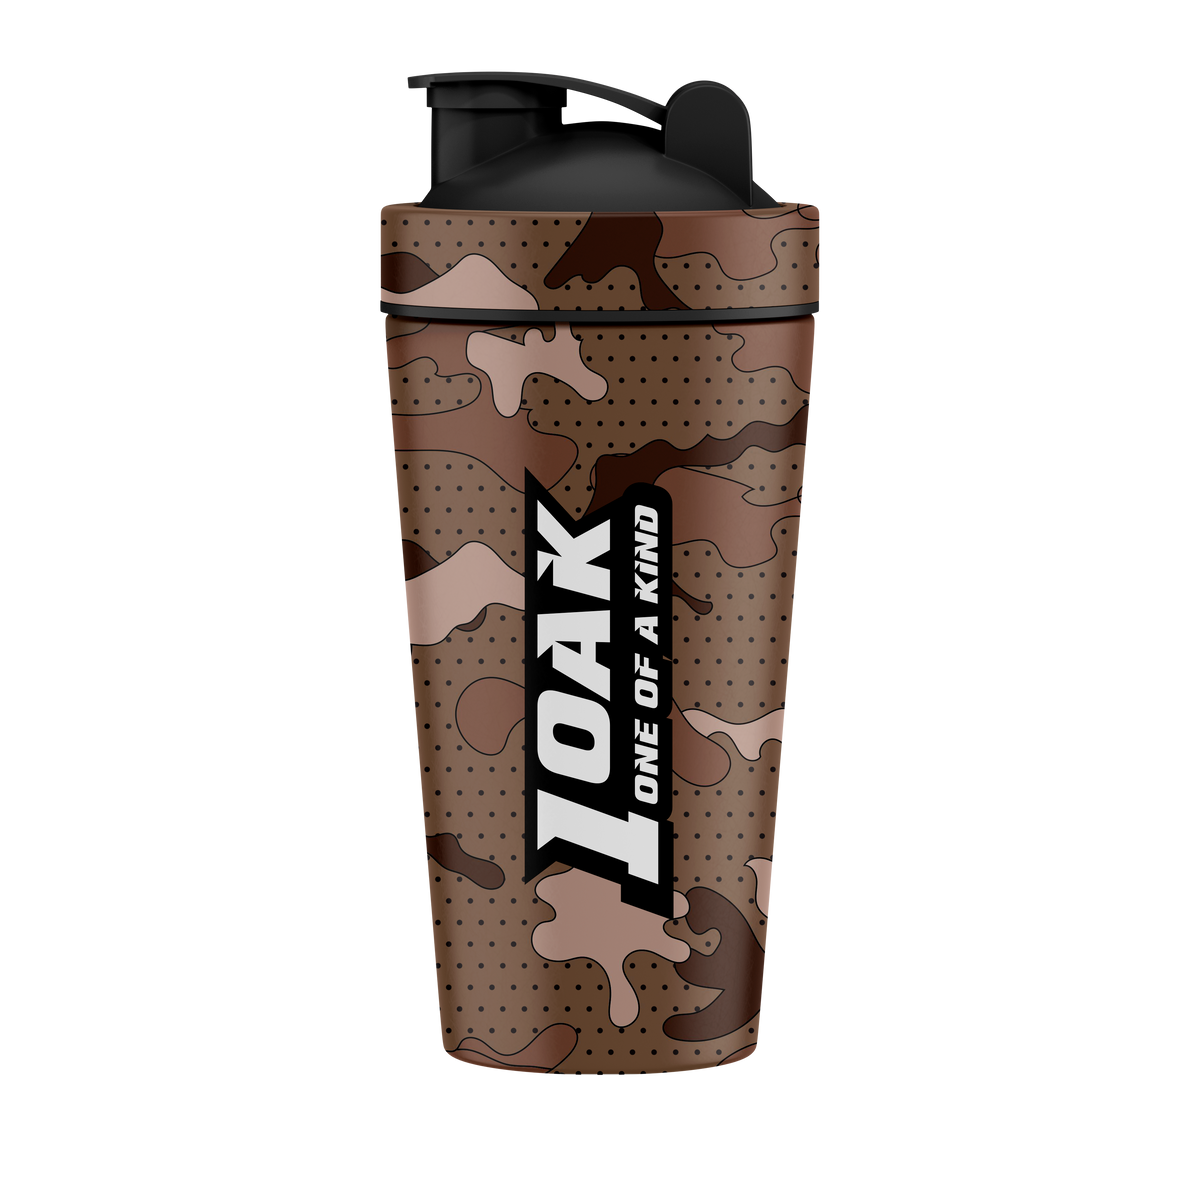 Camo Shaker. Also this recipe was in the box. Not the actual box